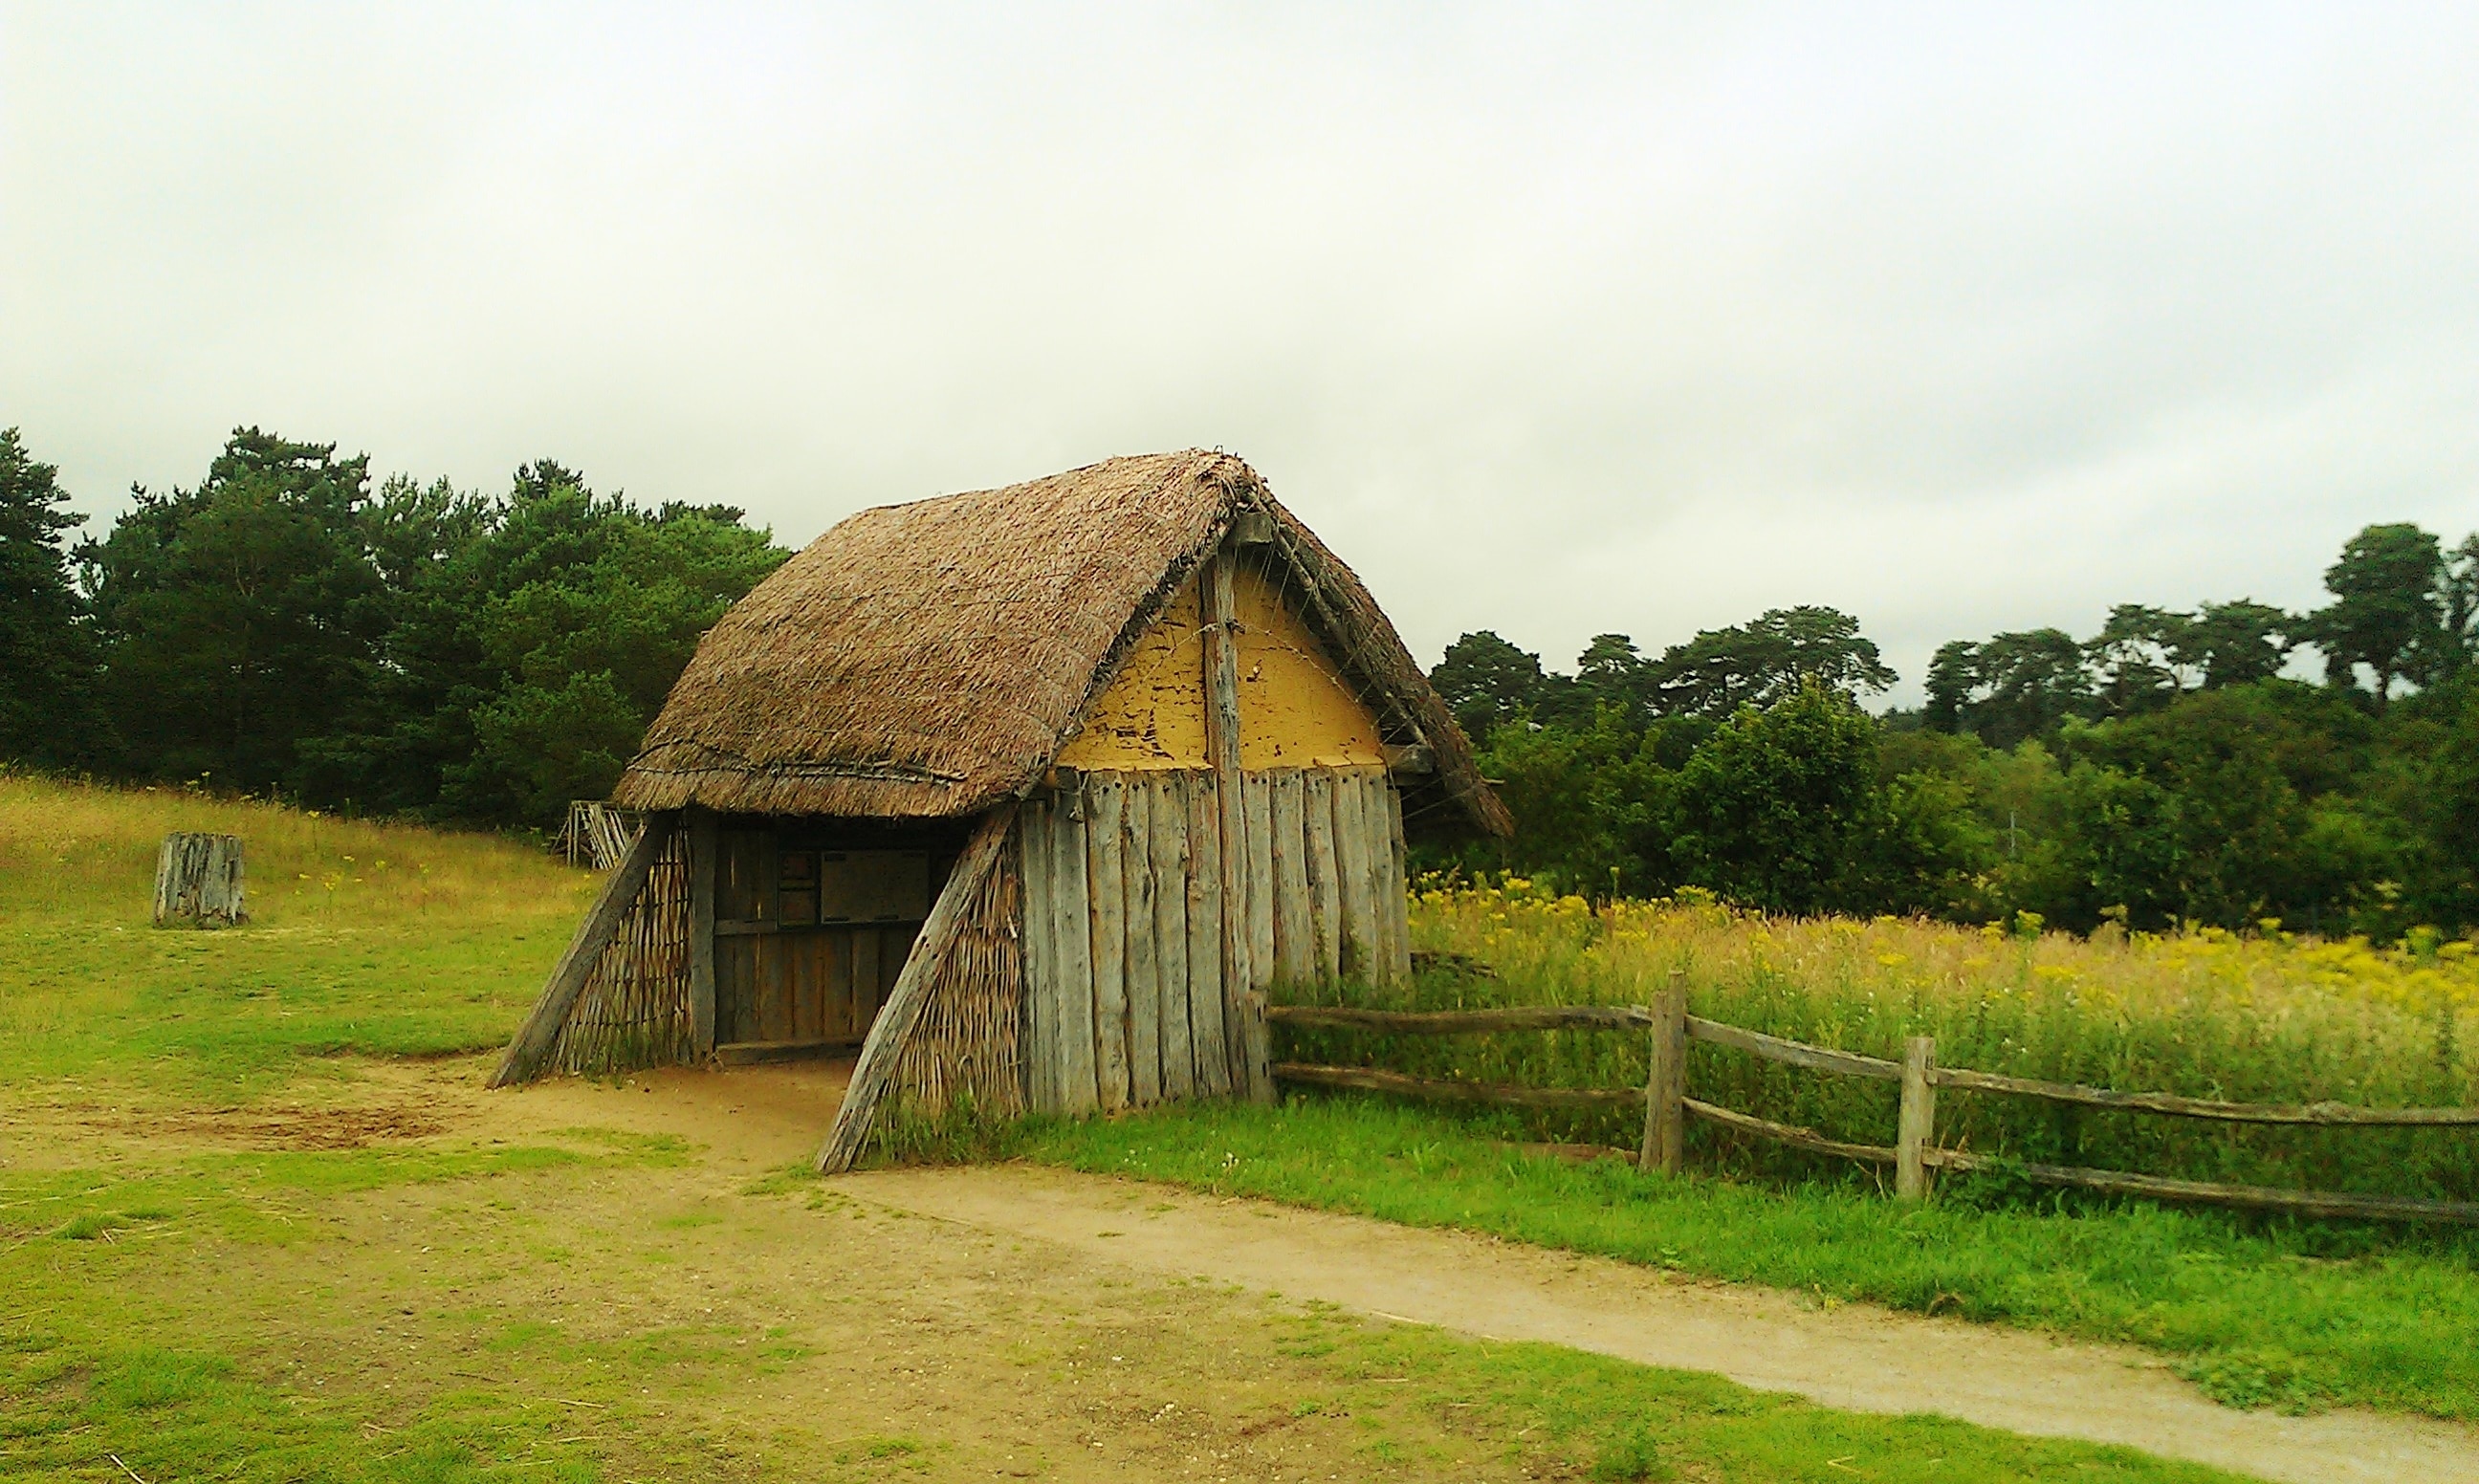 The information hut at West Stow Anglo-Saxon village, constructed using materials that would have been used in Anglo-Saxon England. Photograph taken in summer 2012.